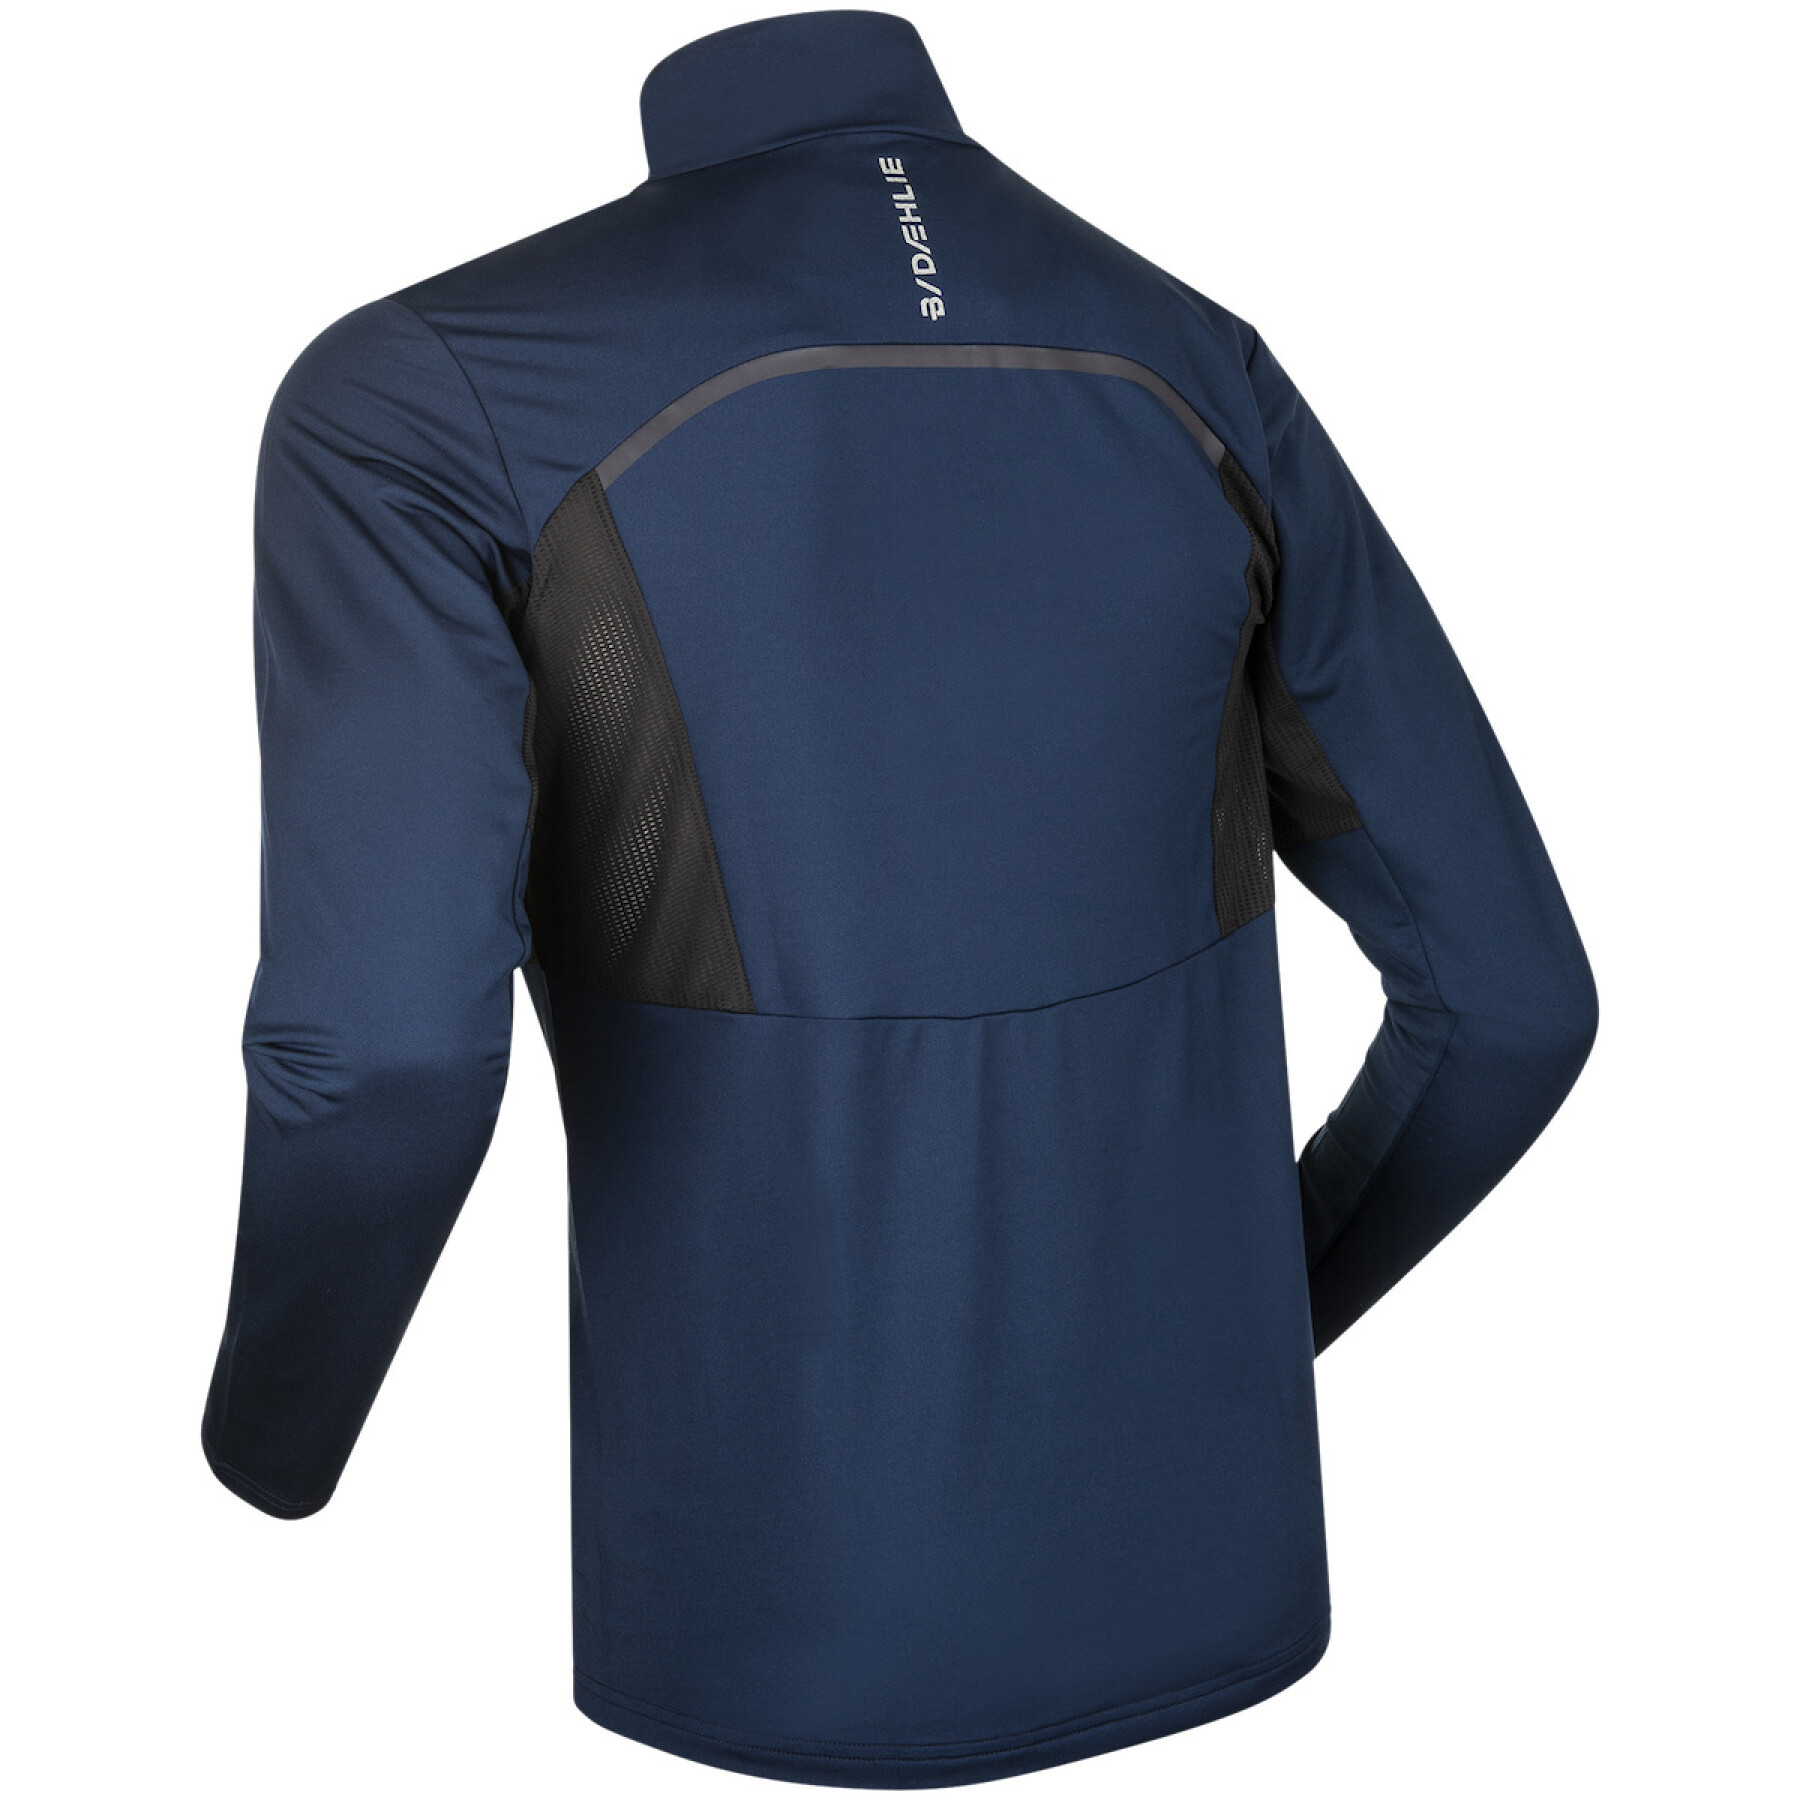 Maillot manches longues Daehlie Sportswear